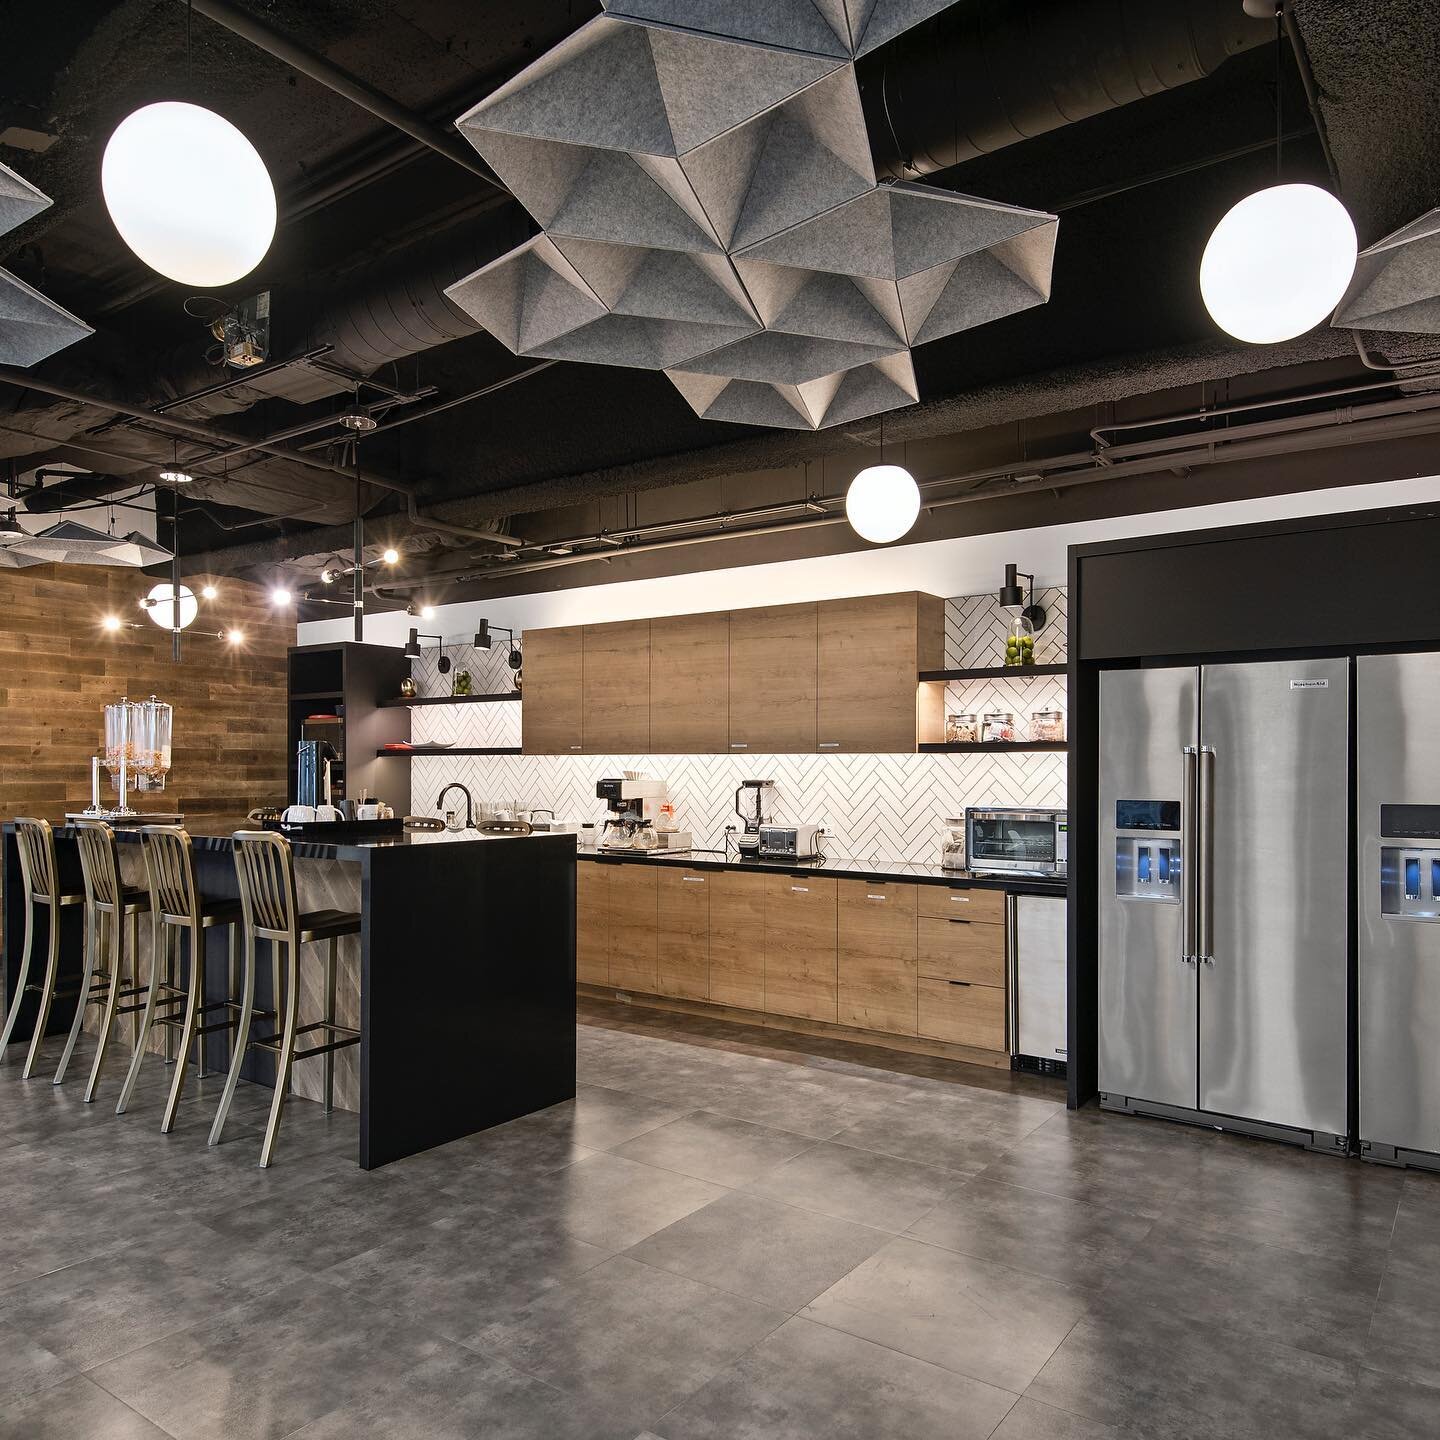 We recently finished the offices of PH Media with @reed_construction! Check out the custom EchoStar ceilings by @kirei.design.materials we installed in the break room.